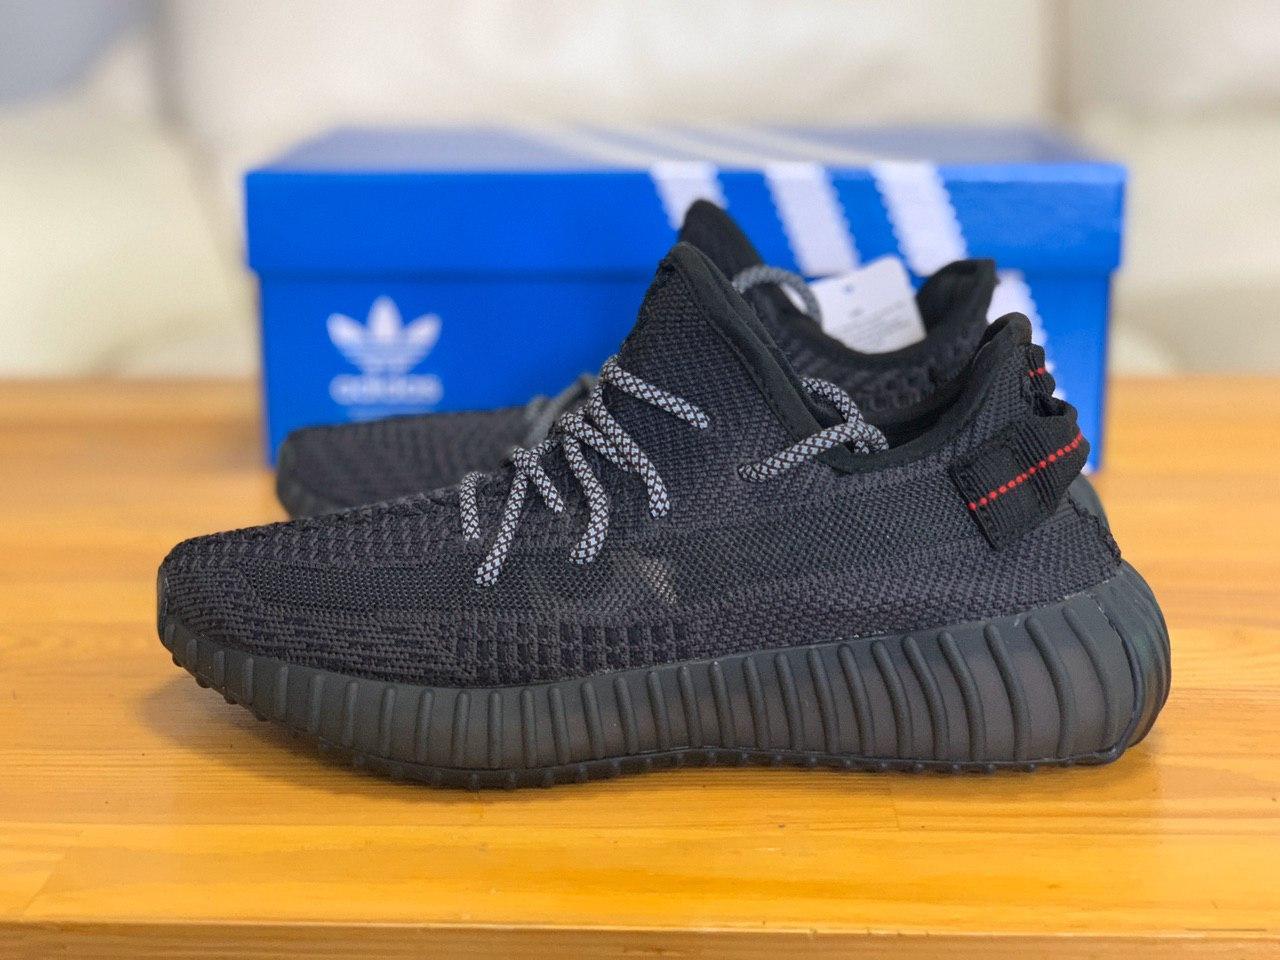 Cheap Adidas Yeezy Boost 350 V2 Mx Rock Gw3774 Size 7 Men Sold Out Confirmed New